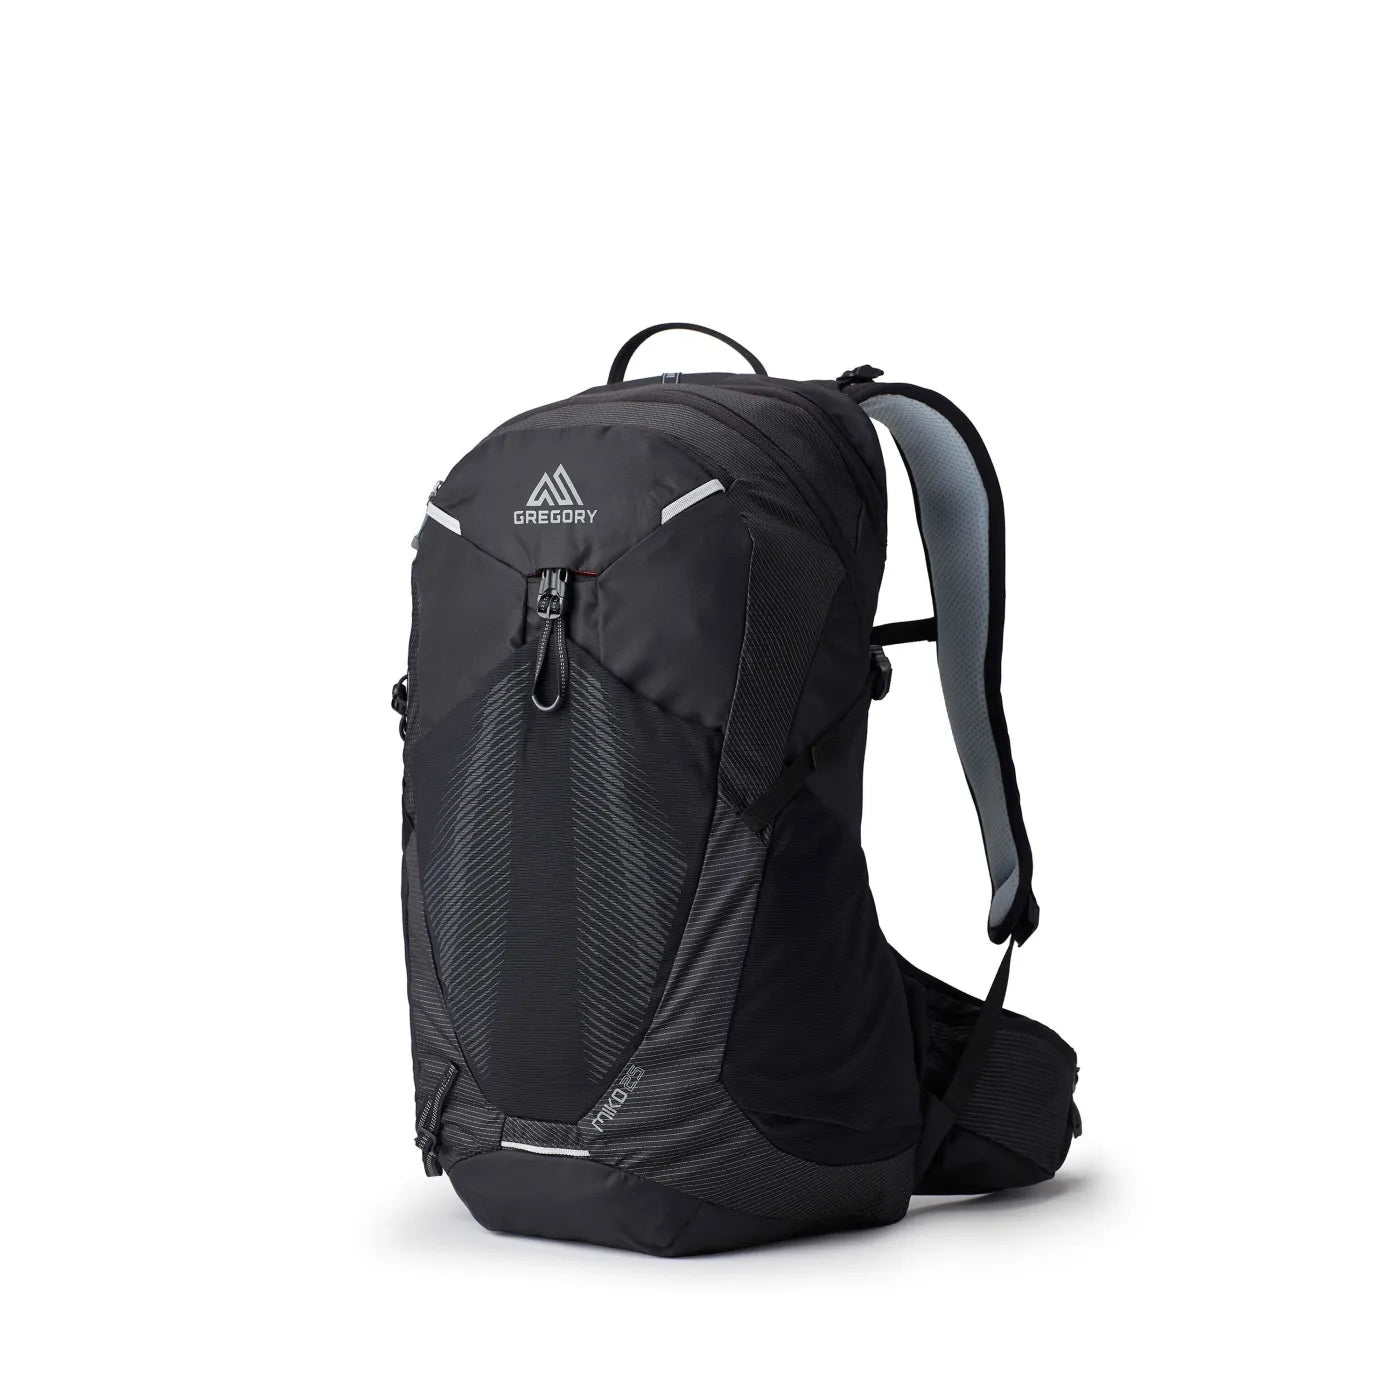 Gregory Men's Miko 25L shown in Optic Black. Front view.